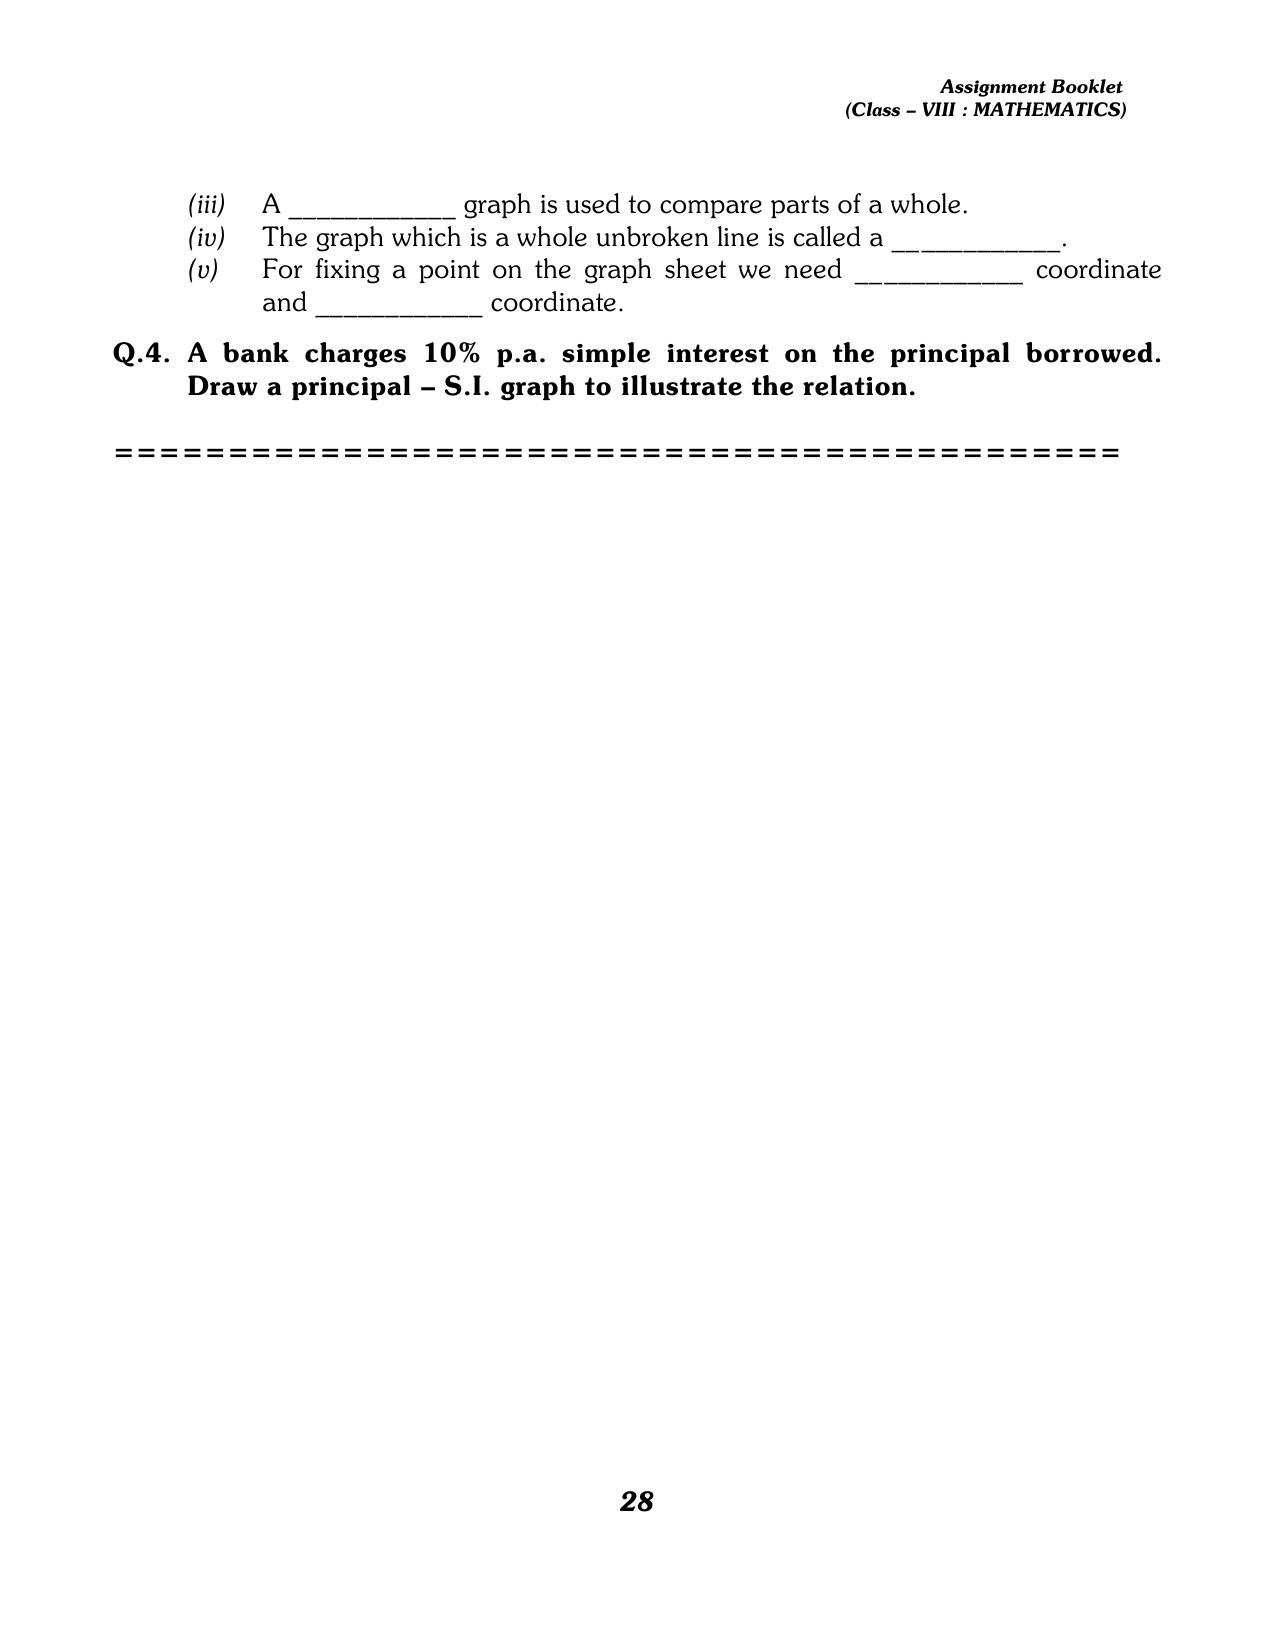 CBSE Worksheets for Class 8 Mathematics Assignment 13 - Page 18